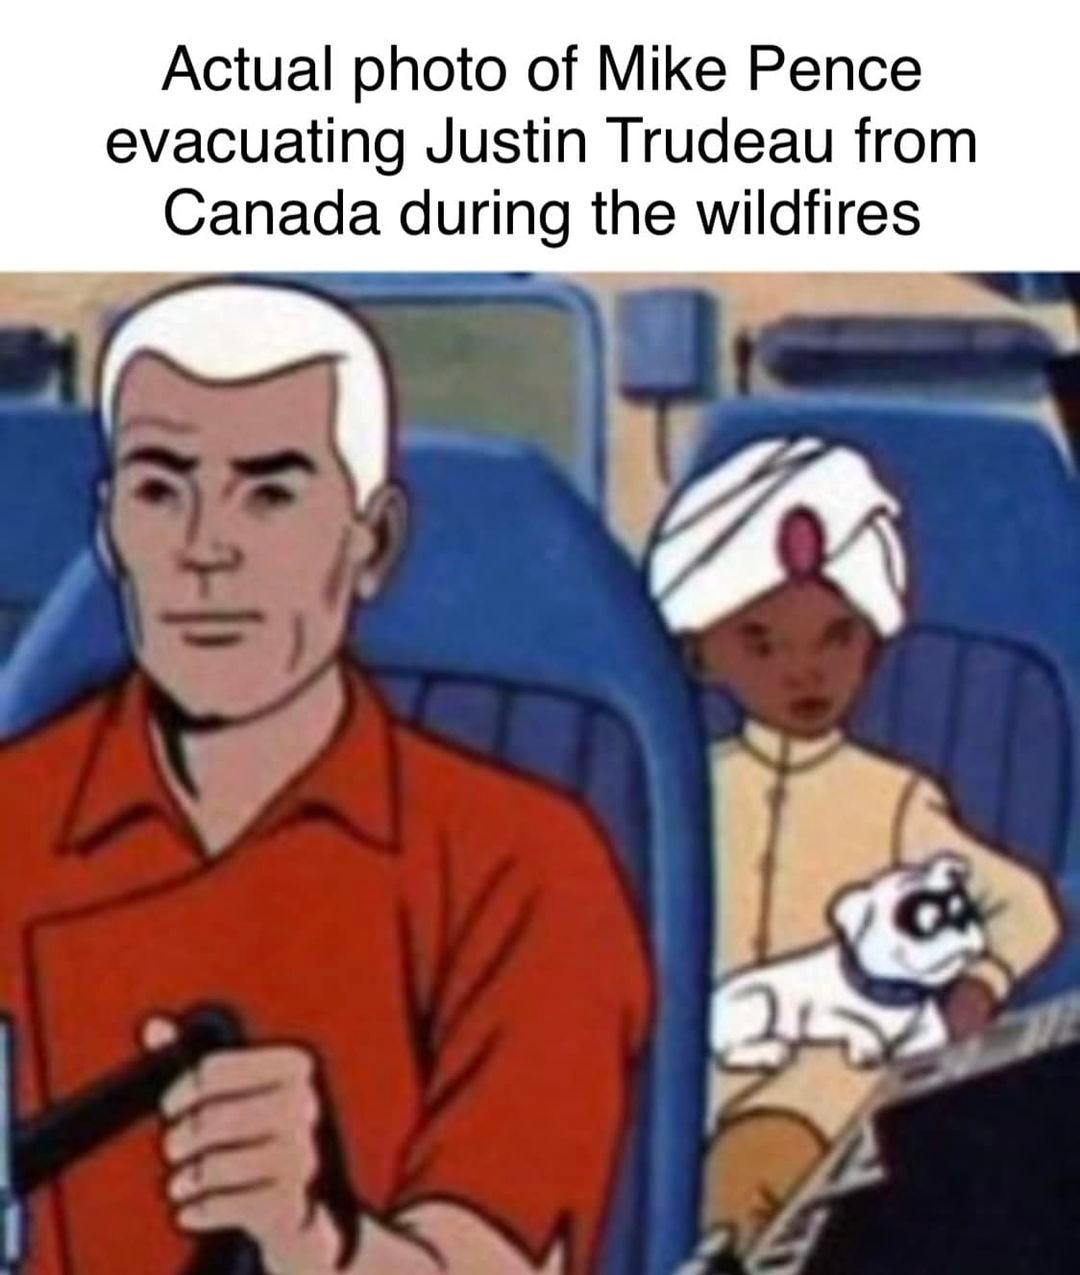 May be an image of text that says 'Actual photo of Mike Pence evacuating Justin Trudeau from Canada during the wildfires'